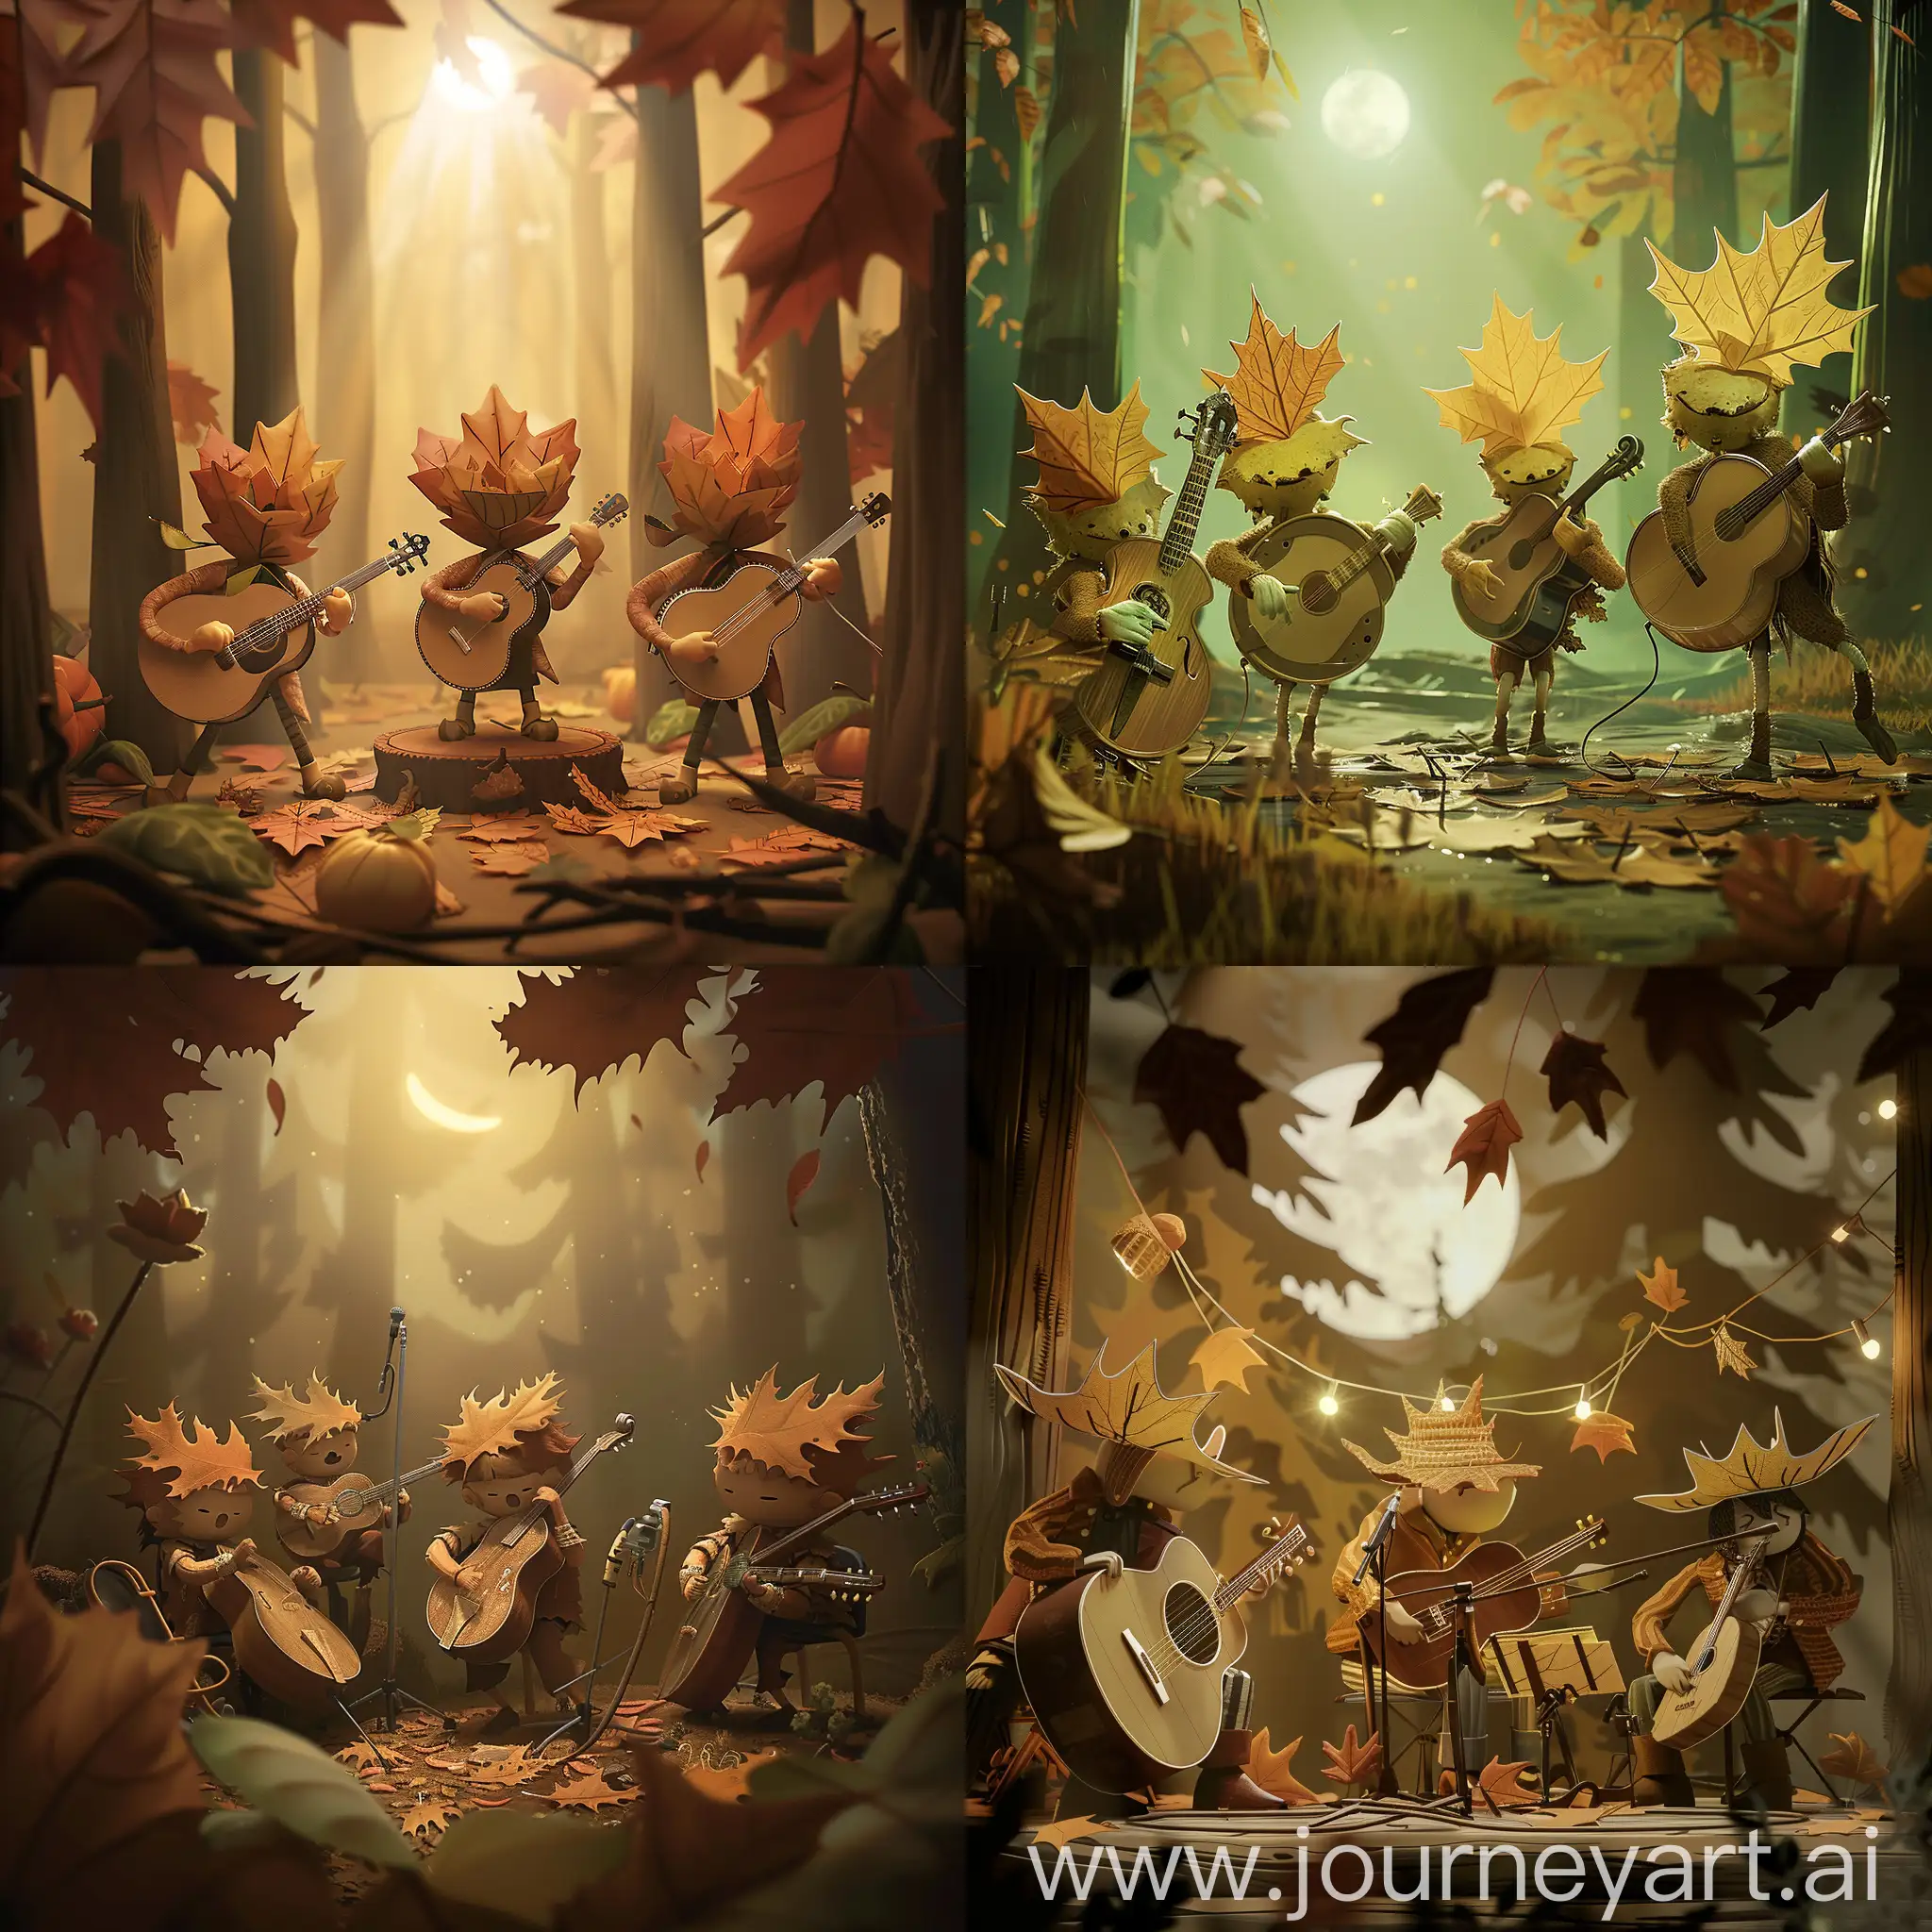 A 2D animation of a folk music band composed of anthropomorphic autumn leaves, each playing traditional bluegrass instruments, amidst a rustic forest setting dappled with the soft light of a harvest moon.